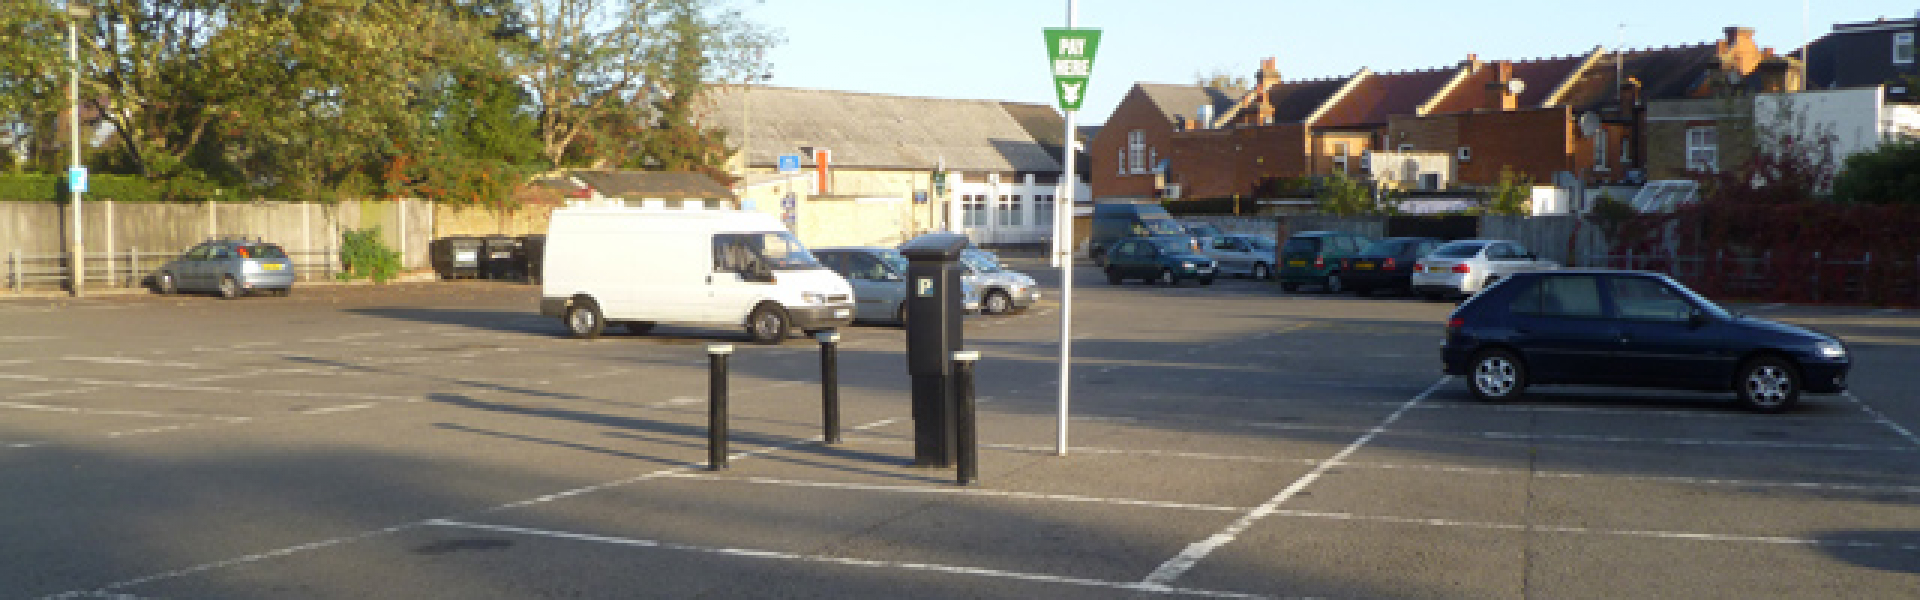 Will free parking materialise?